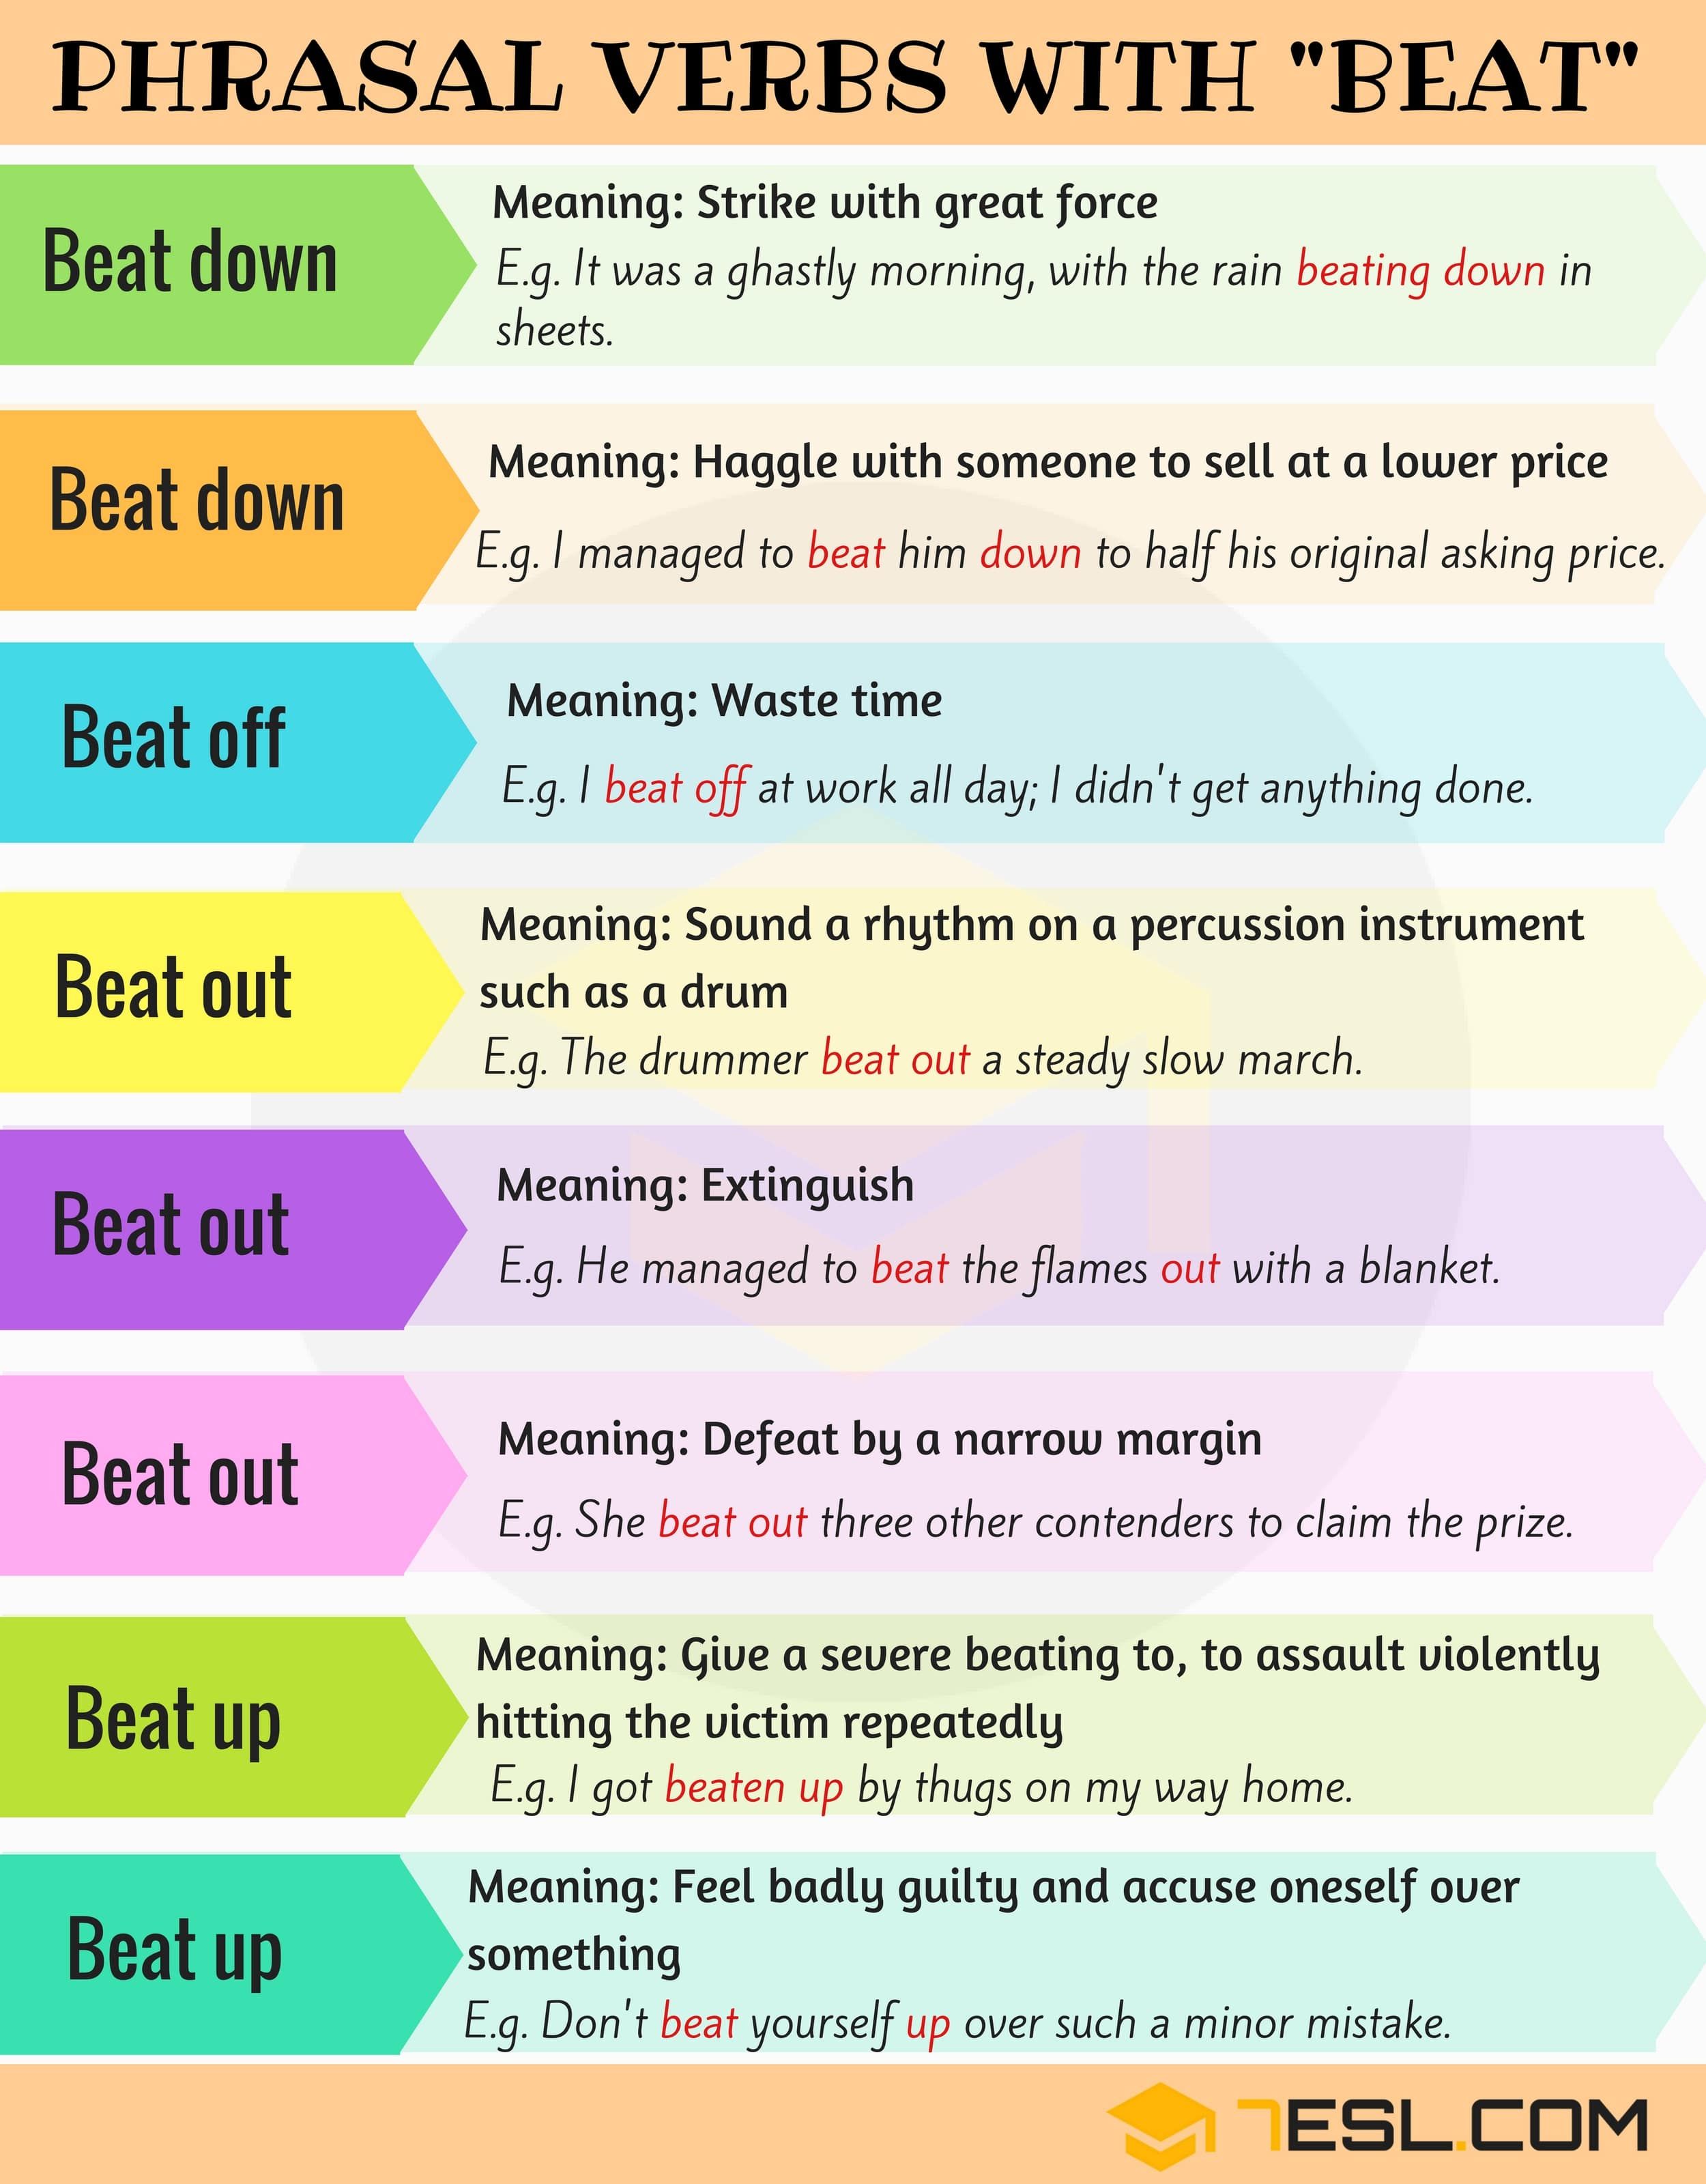 60-useful-phrasal-verbs-with-take-with-meaning-and-examples-7-e-s-l